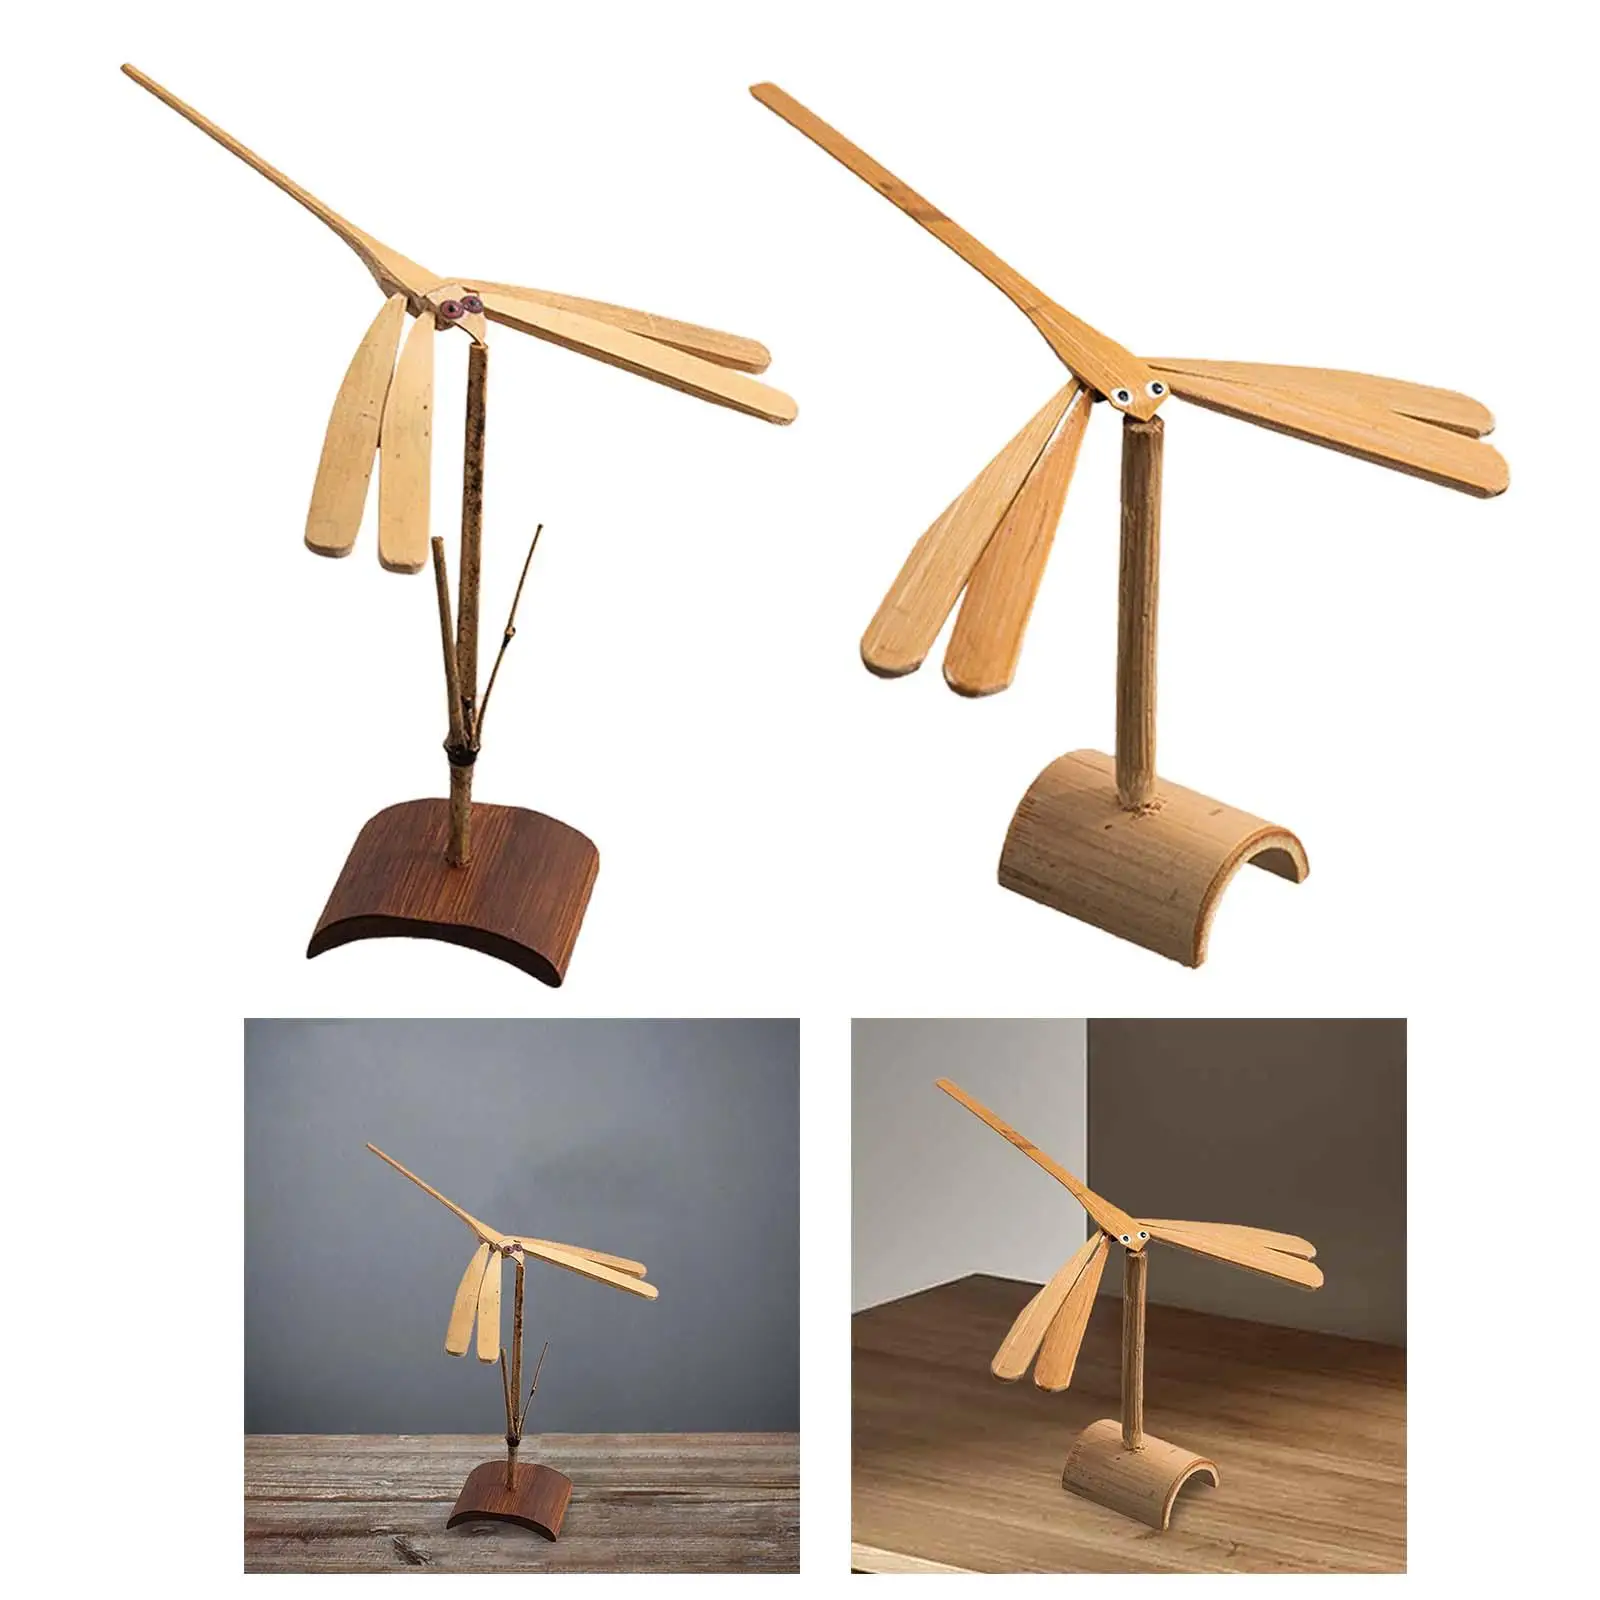 Flying Helicopter Toy with Stable Base Handmade Crafts Bamboo Propeller for Holidays Bedroom Gift Home Decor Aniversary